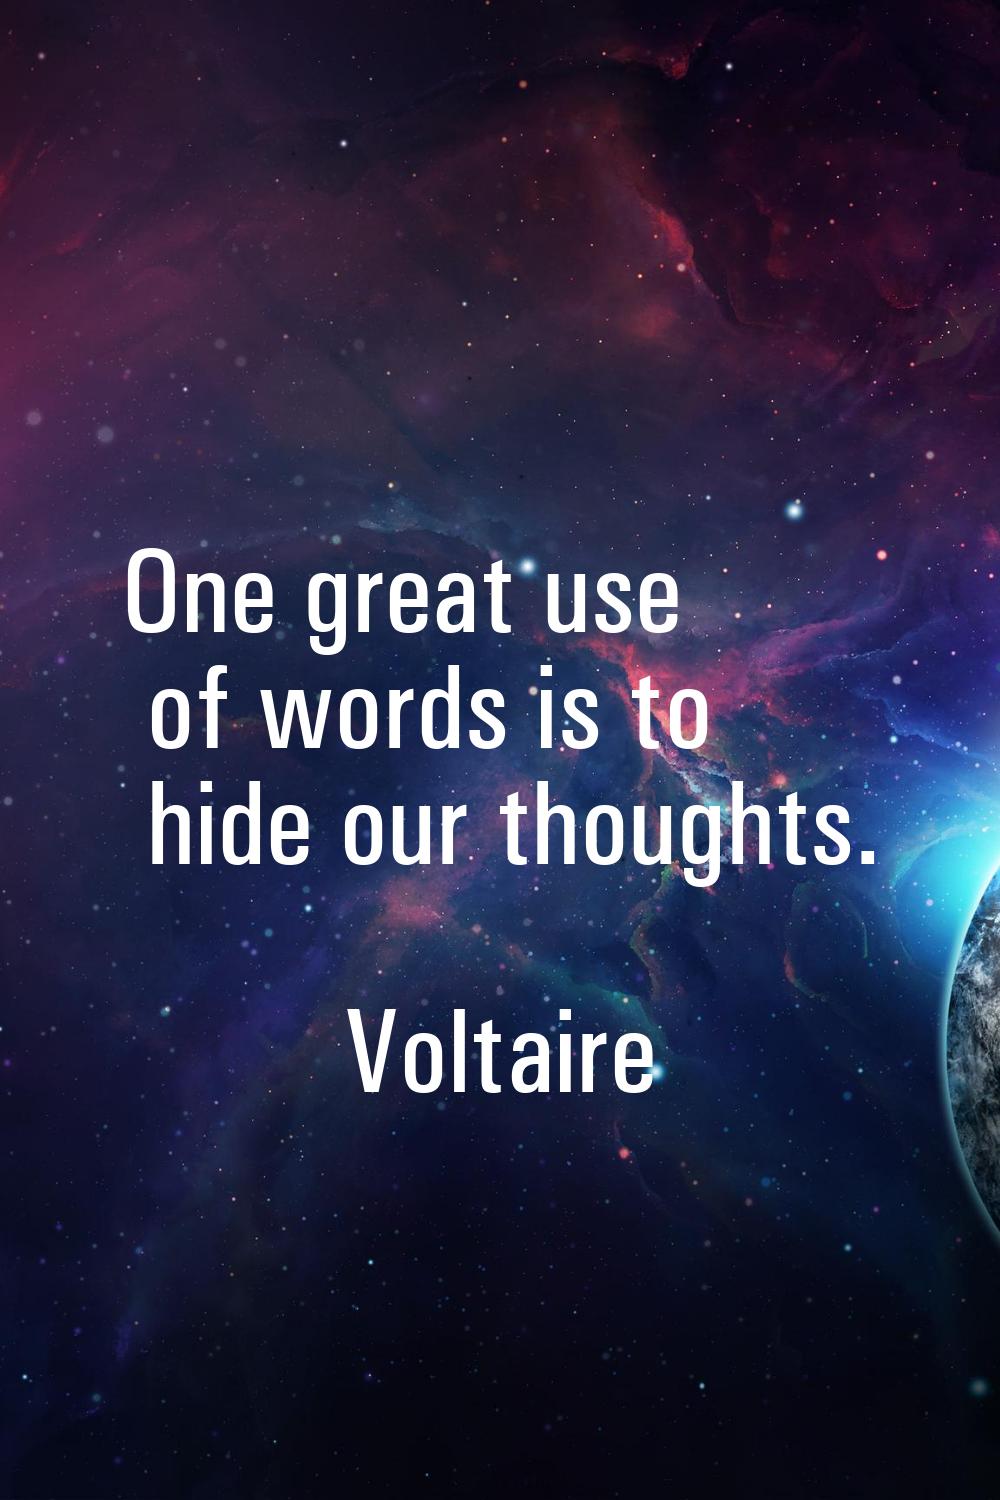 One great use of words is to hide our thoughts.